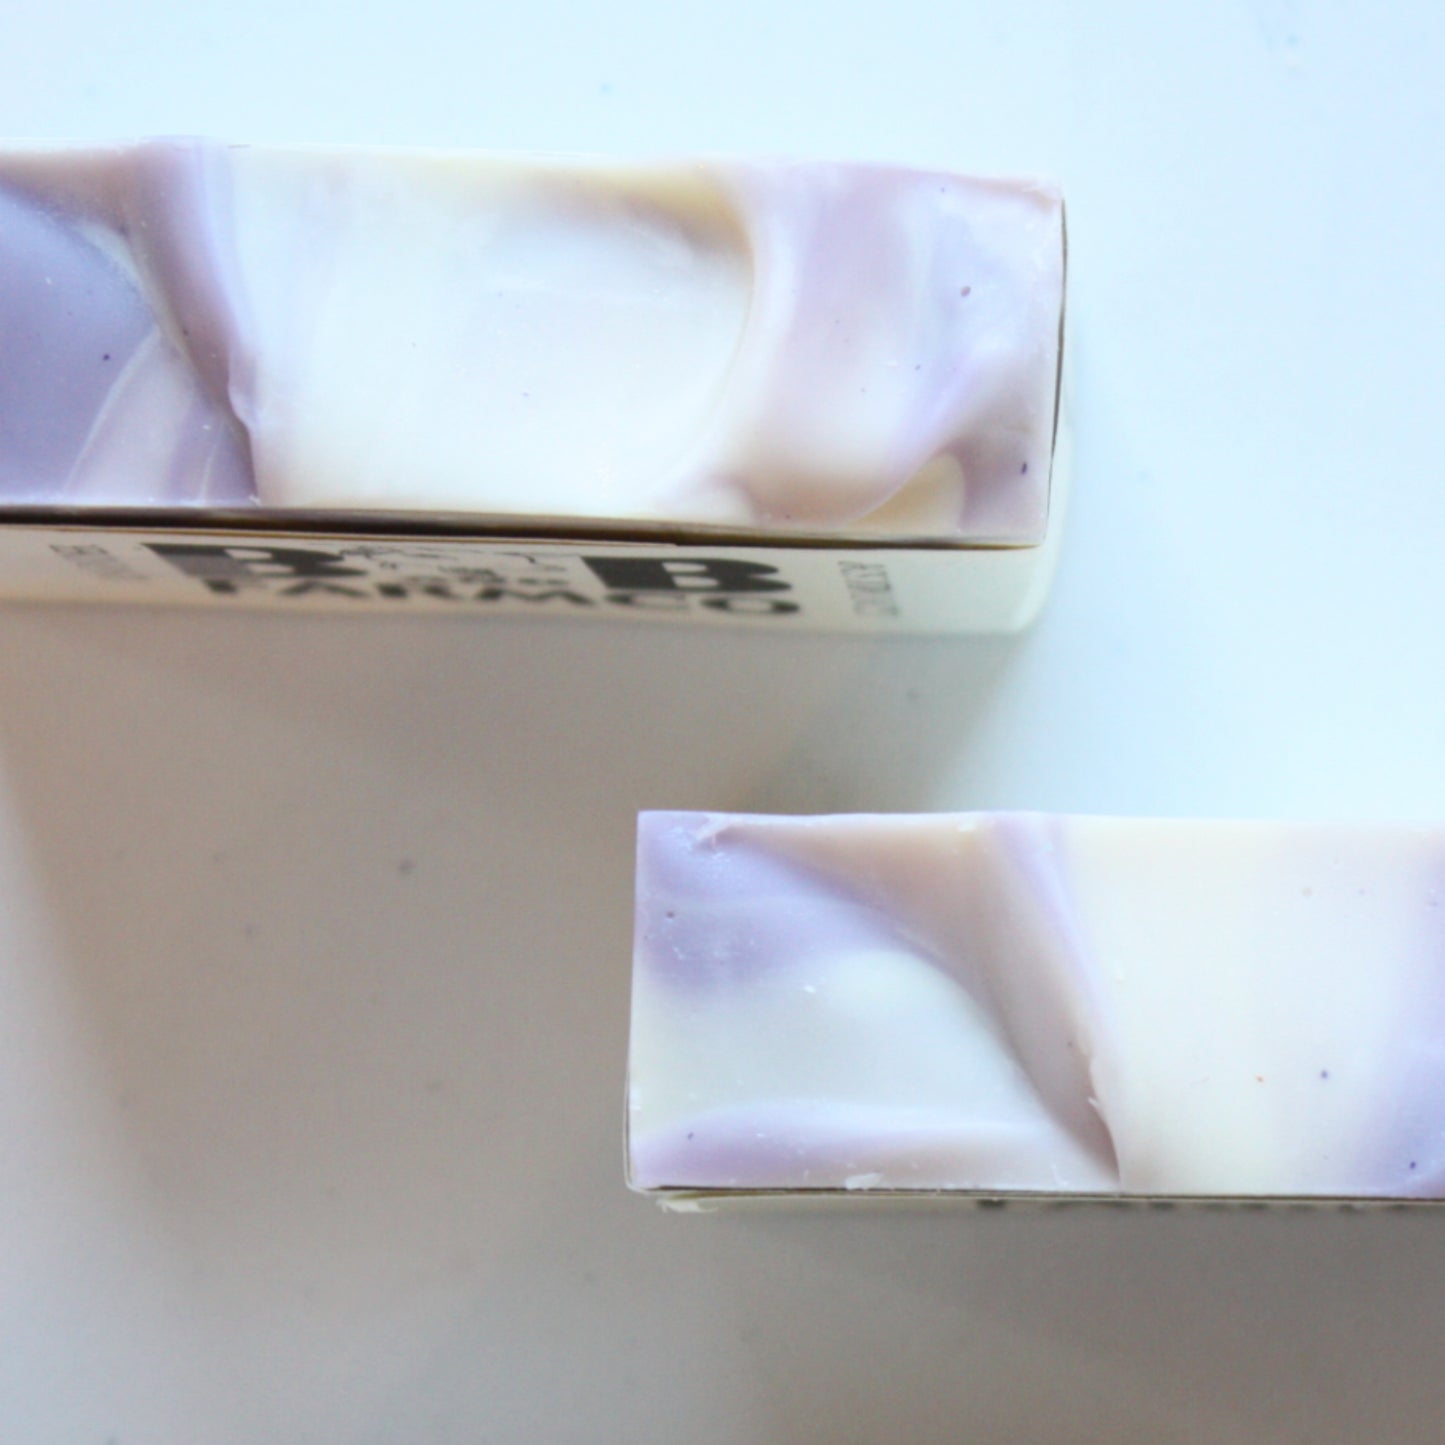 Lavender Handmade Goat Milk Soap - Made in the USA